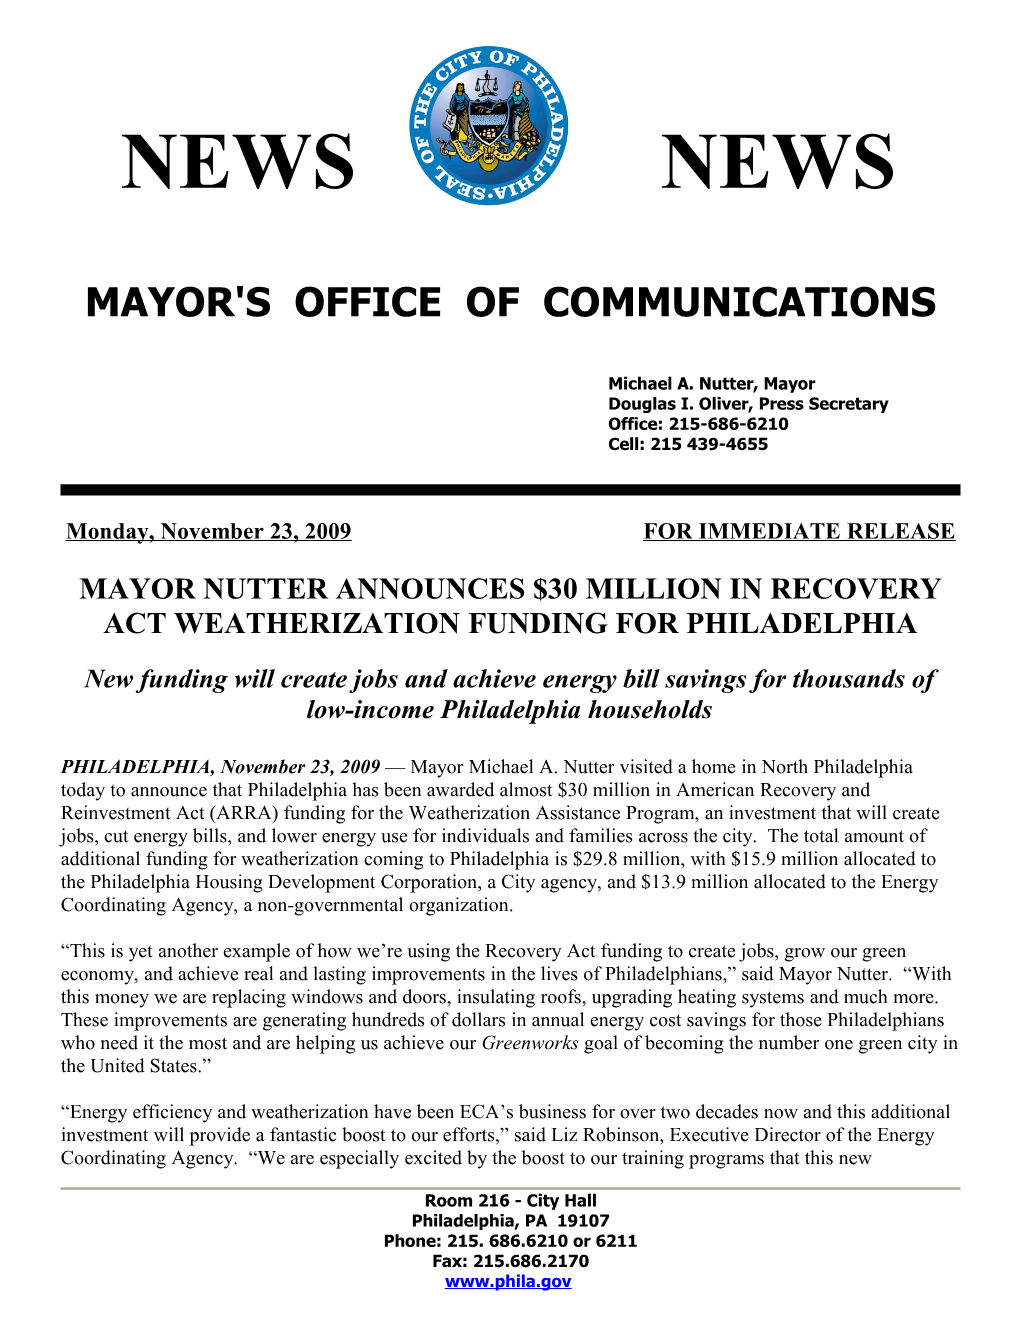 Mayor Nutter Announces $30 Million in Recovery Act Weatherization Funding for Philadelphia